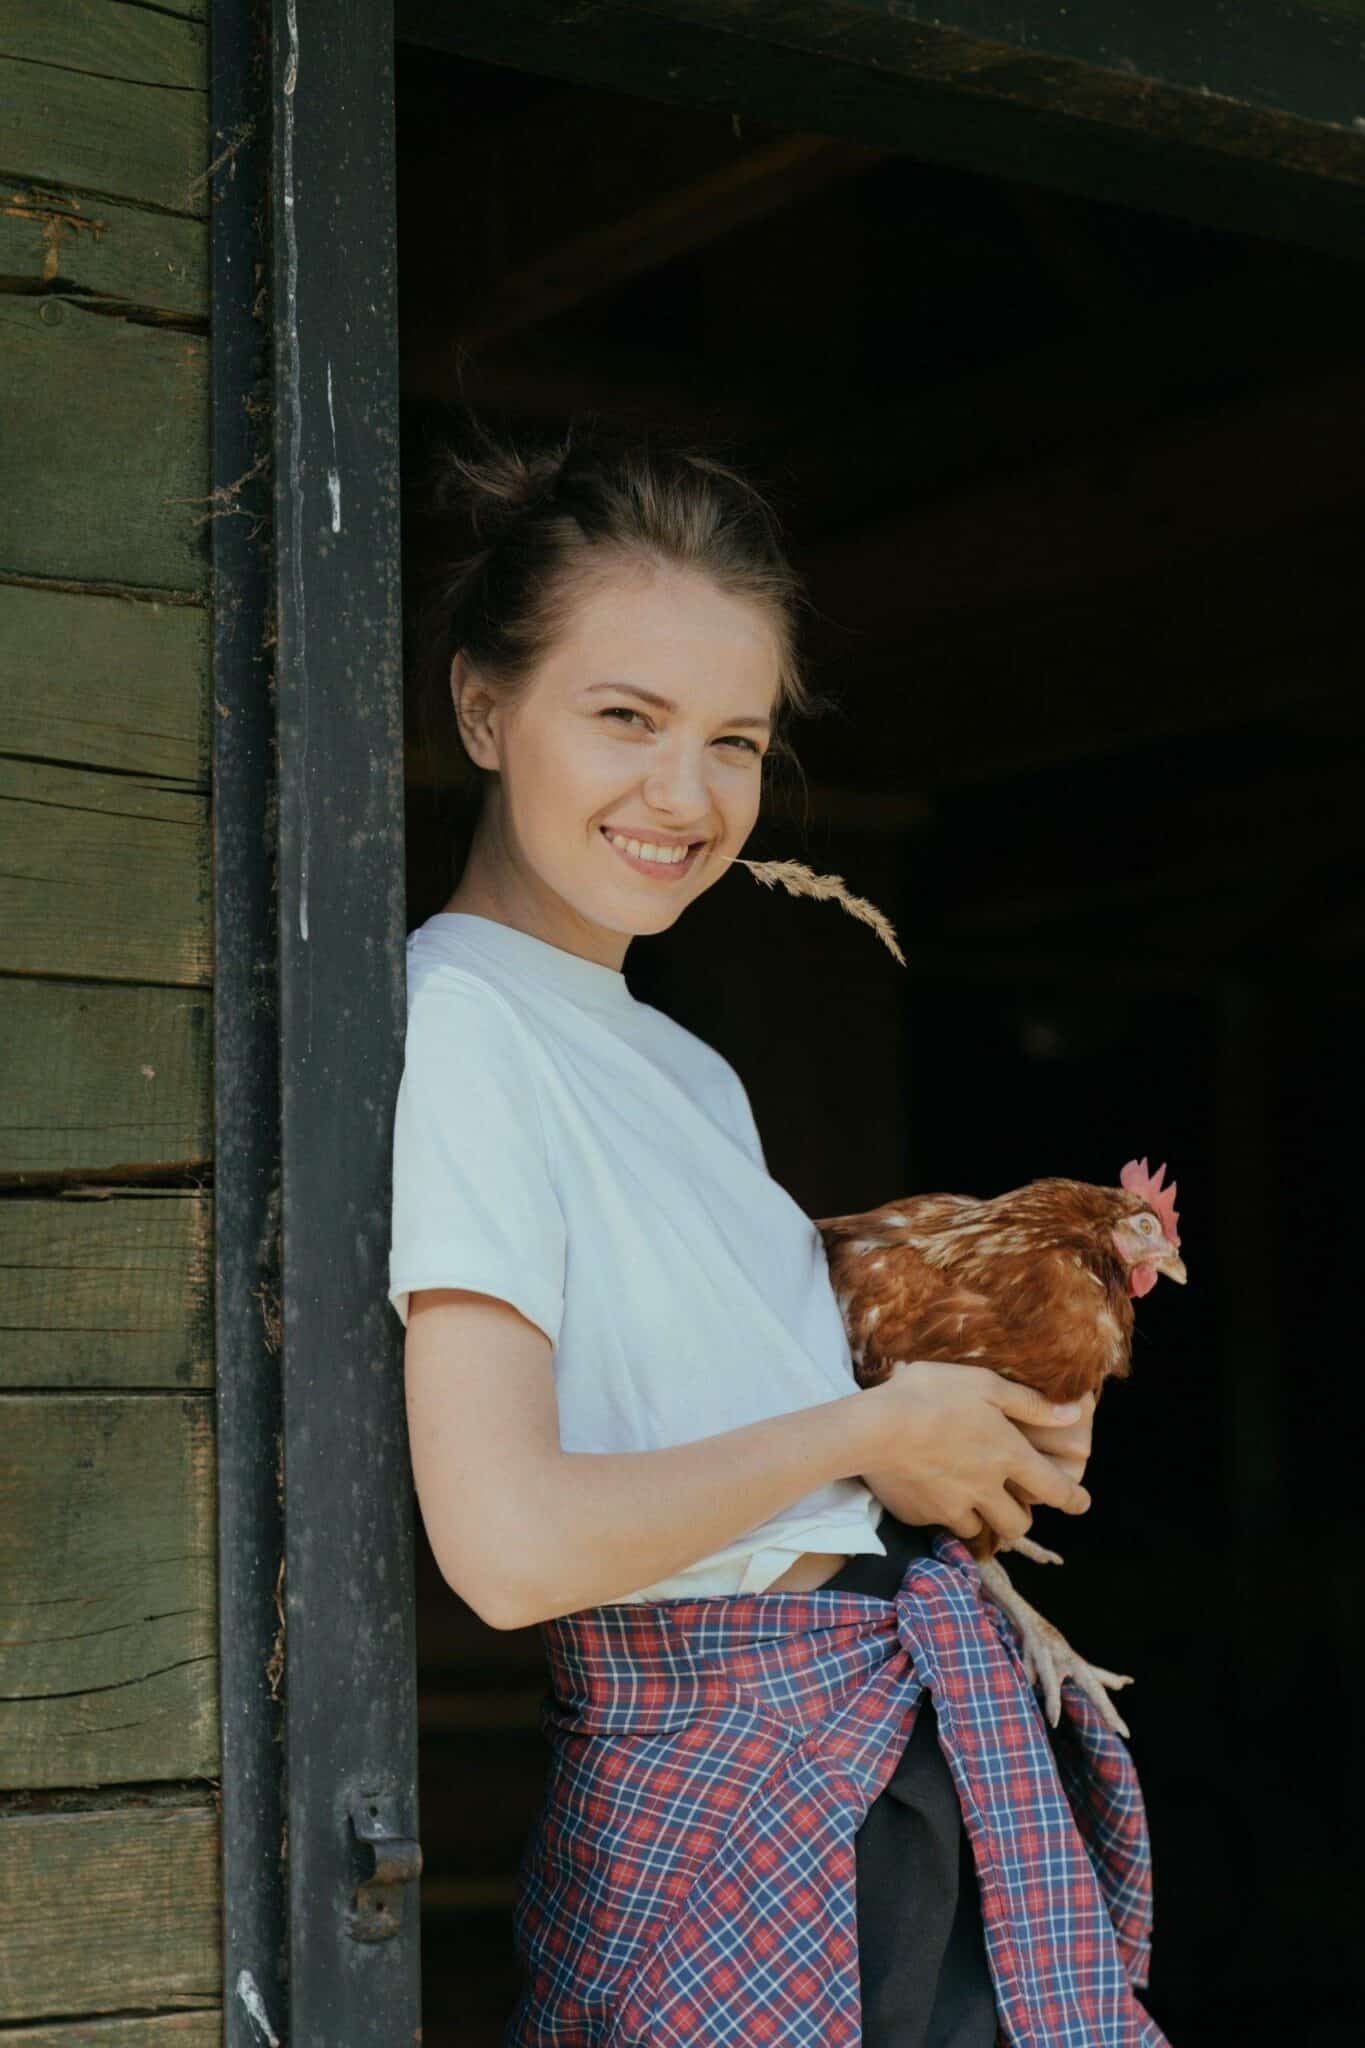 Do my chickens like me? The most common ways chickens show affection to  humans  Run Chicken Do my chickens like me? The most common ways chickens  show affection to humans 